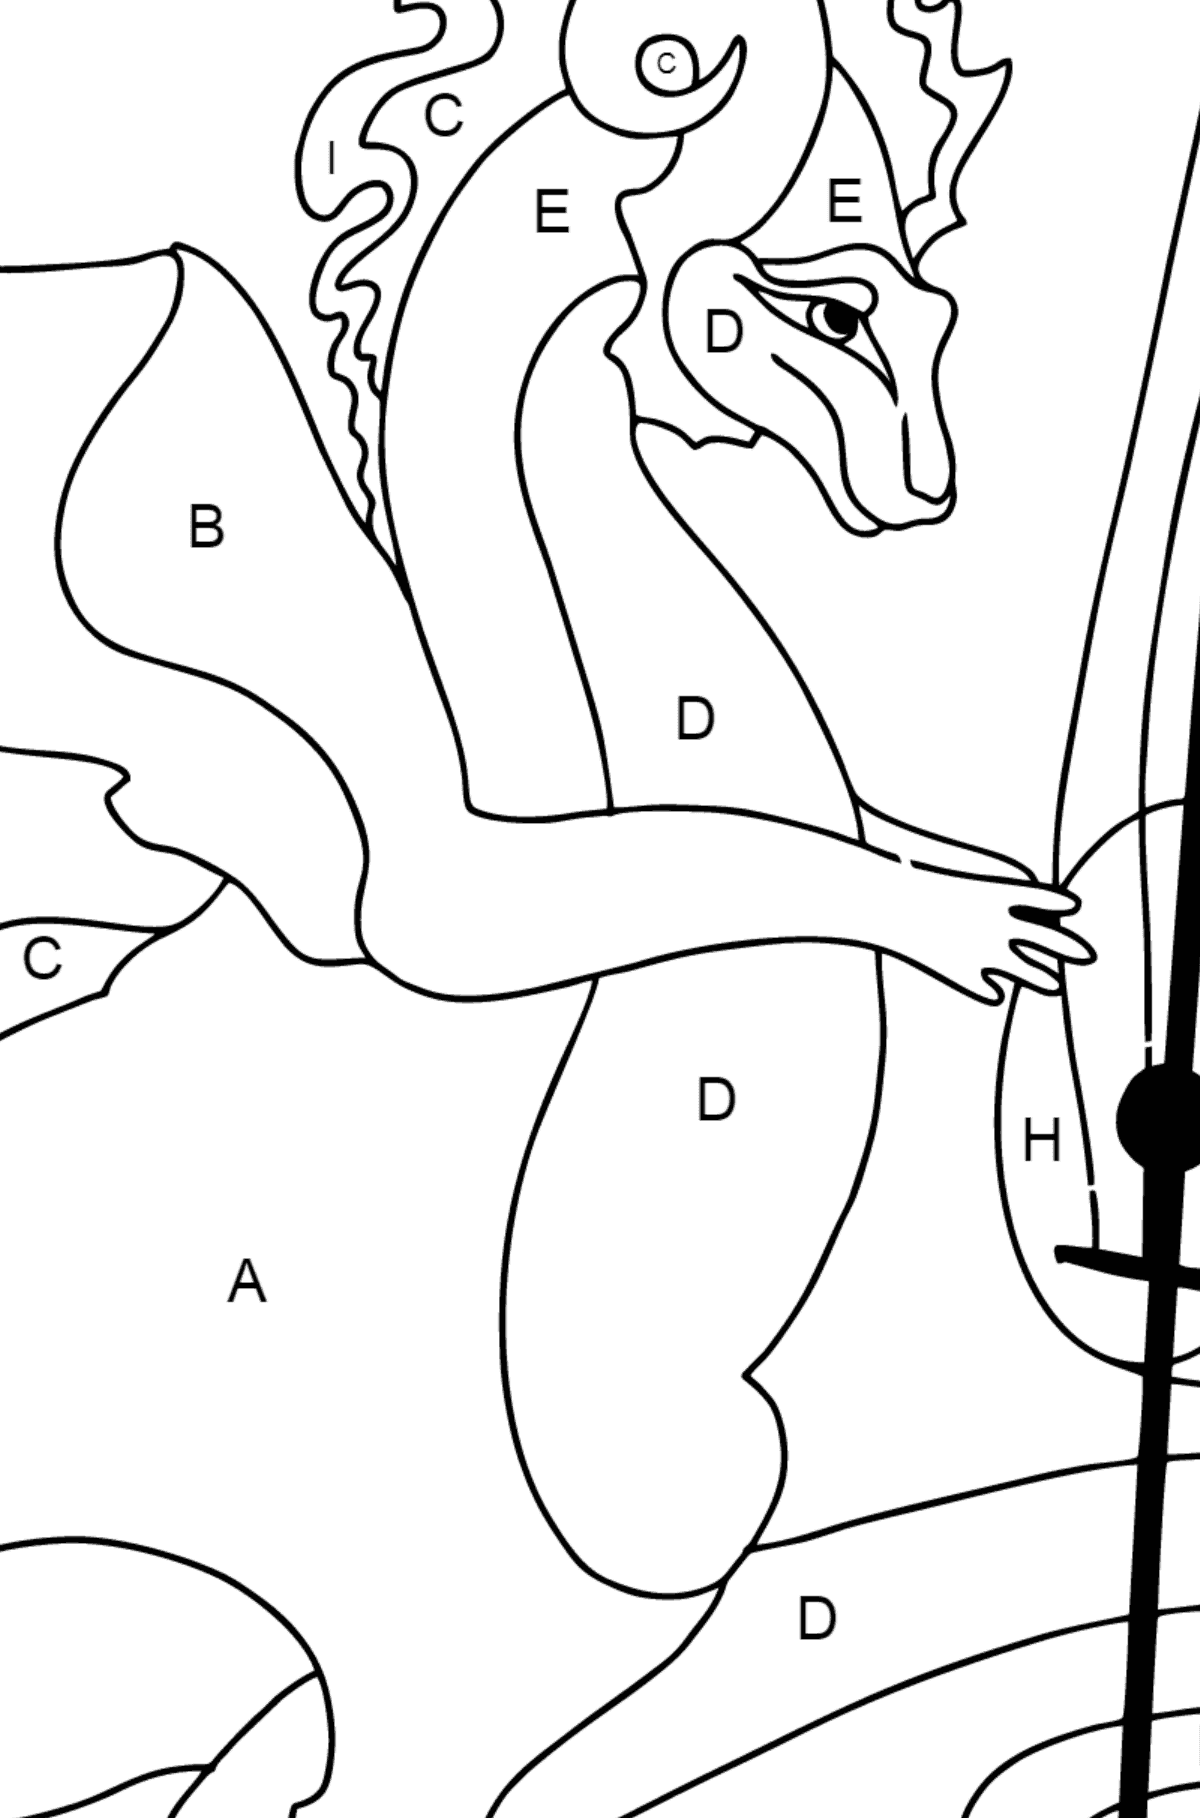 Coloring Page - A Dragon Loves Music - Coloring by Letters for Children